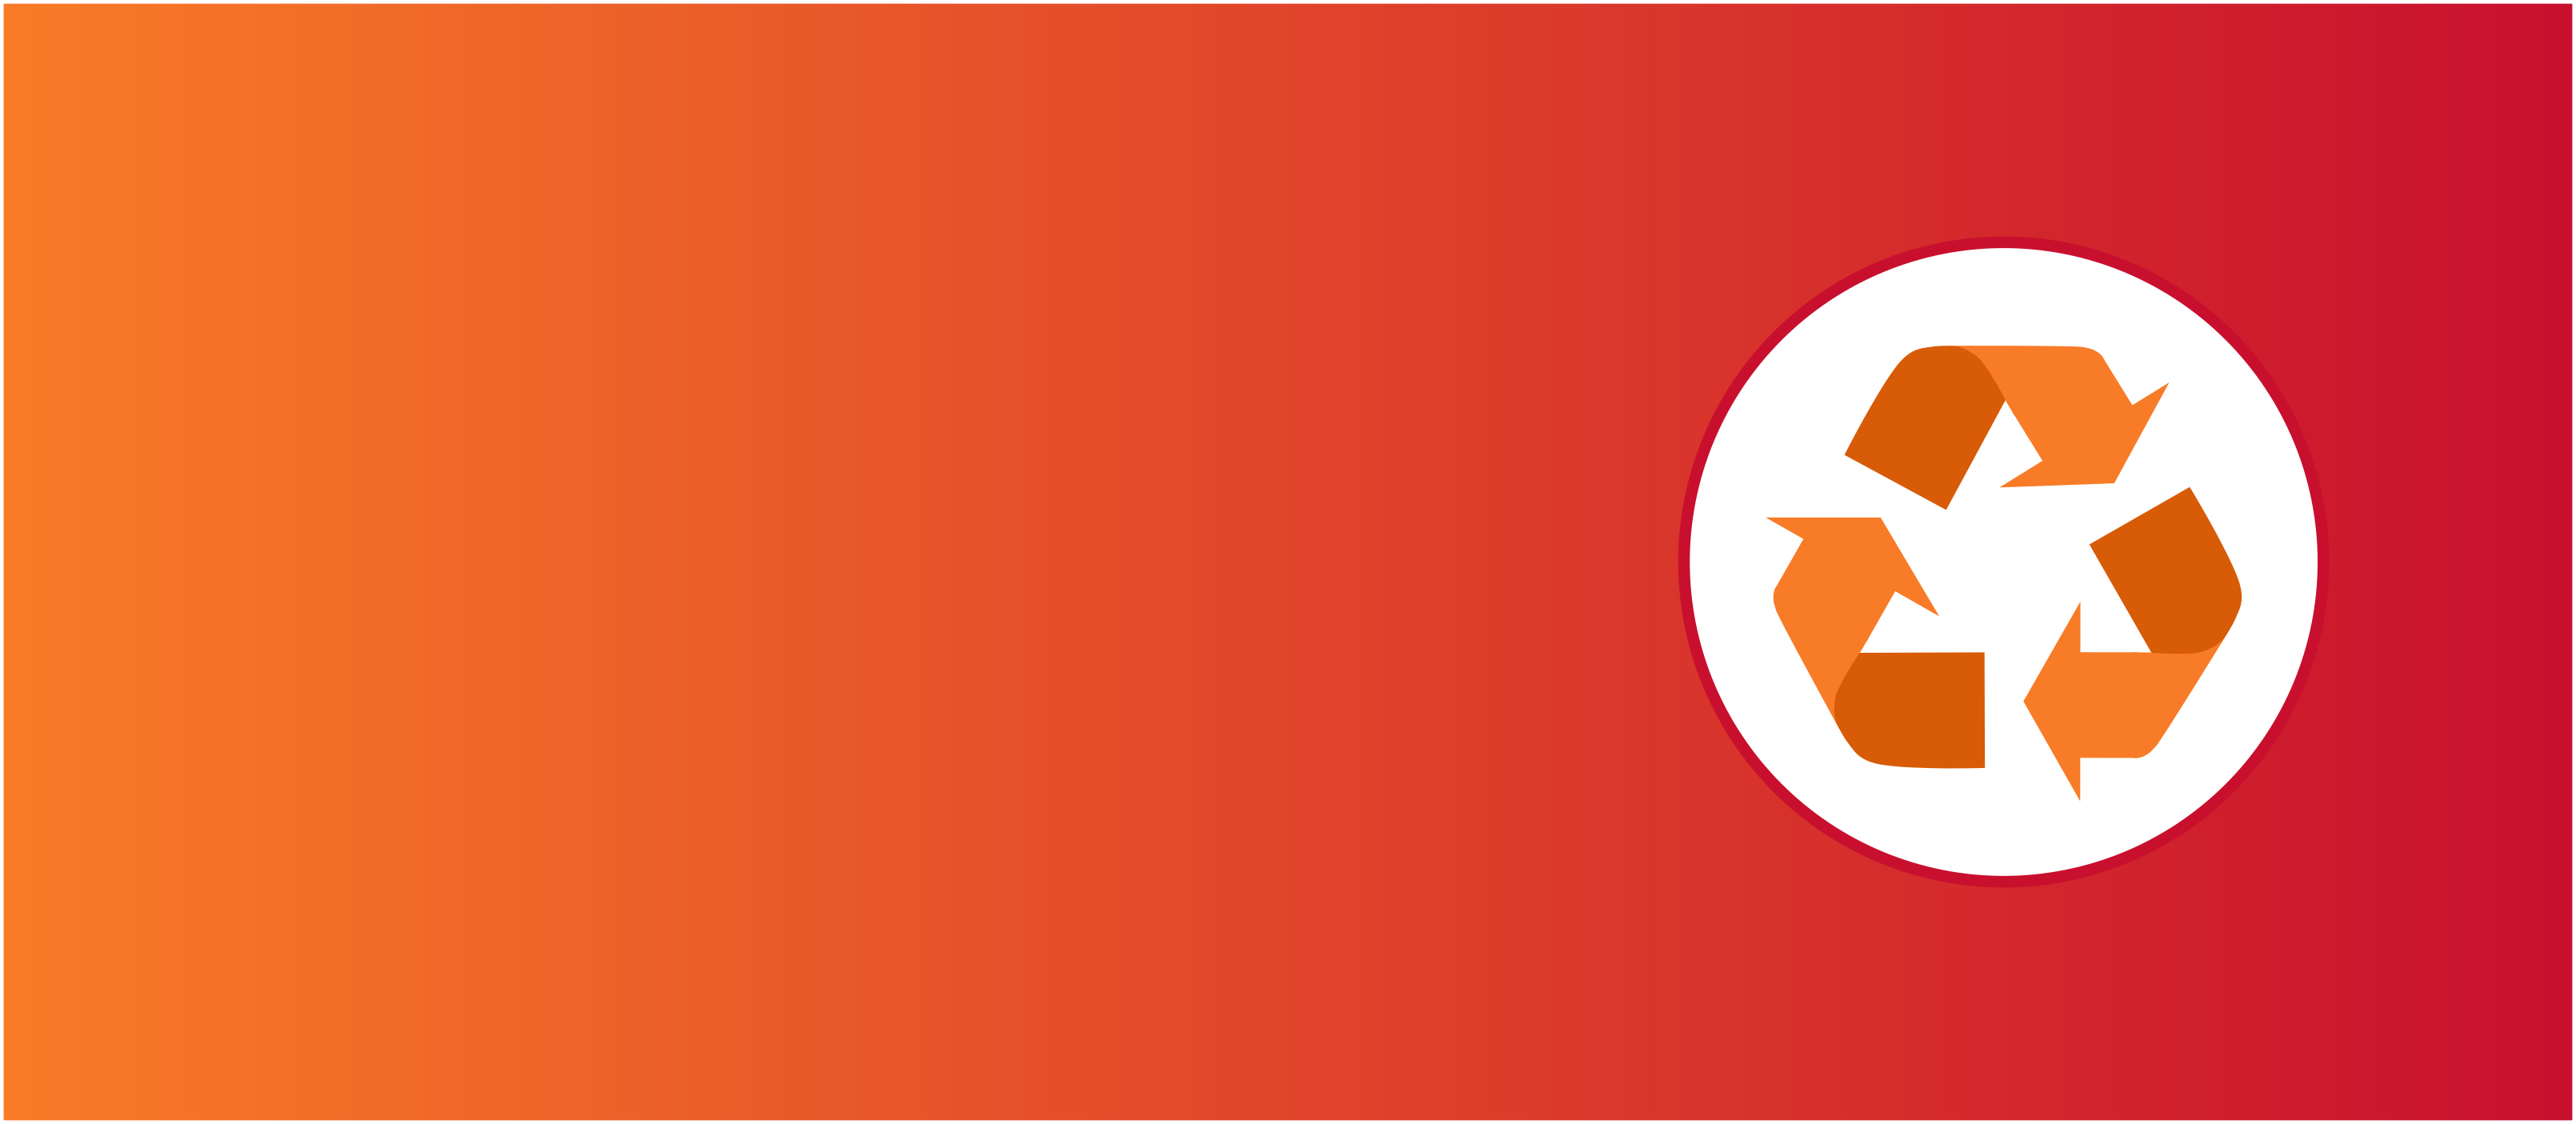 Logo of an orange recycling sign on a background of orange-to-red gradient